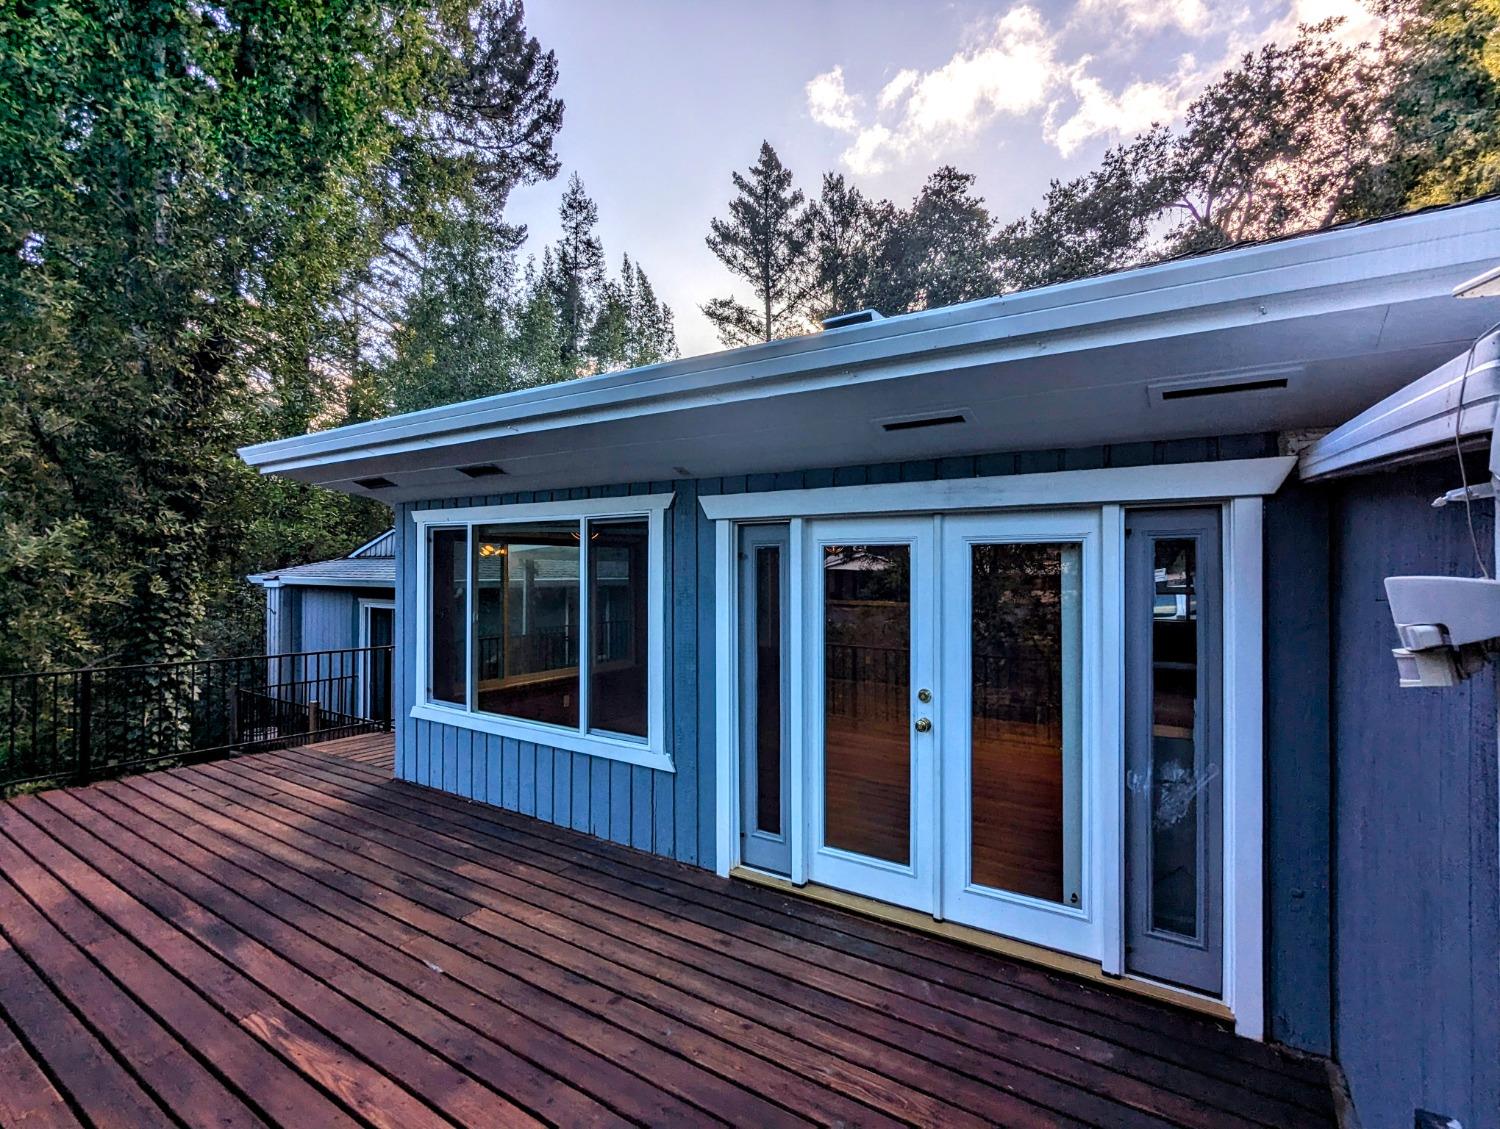 Photo of 220 Arnold Ave in Ben Lomond, CA